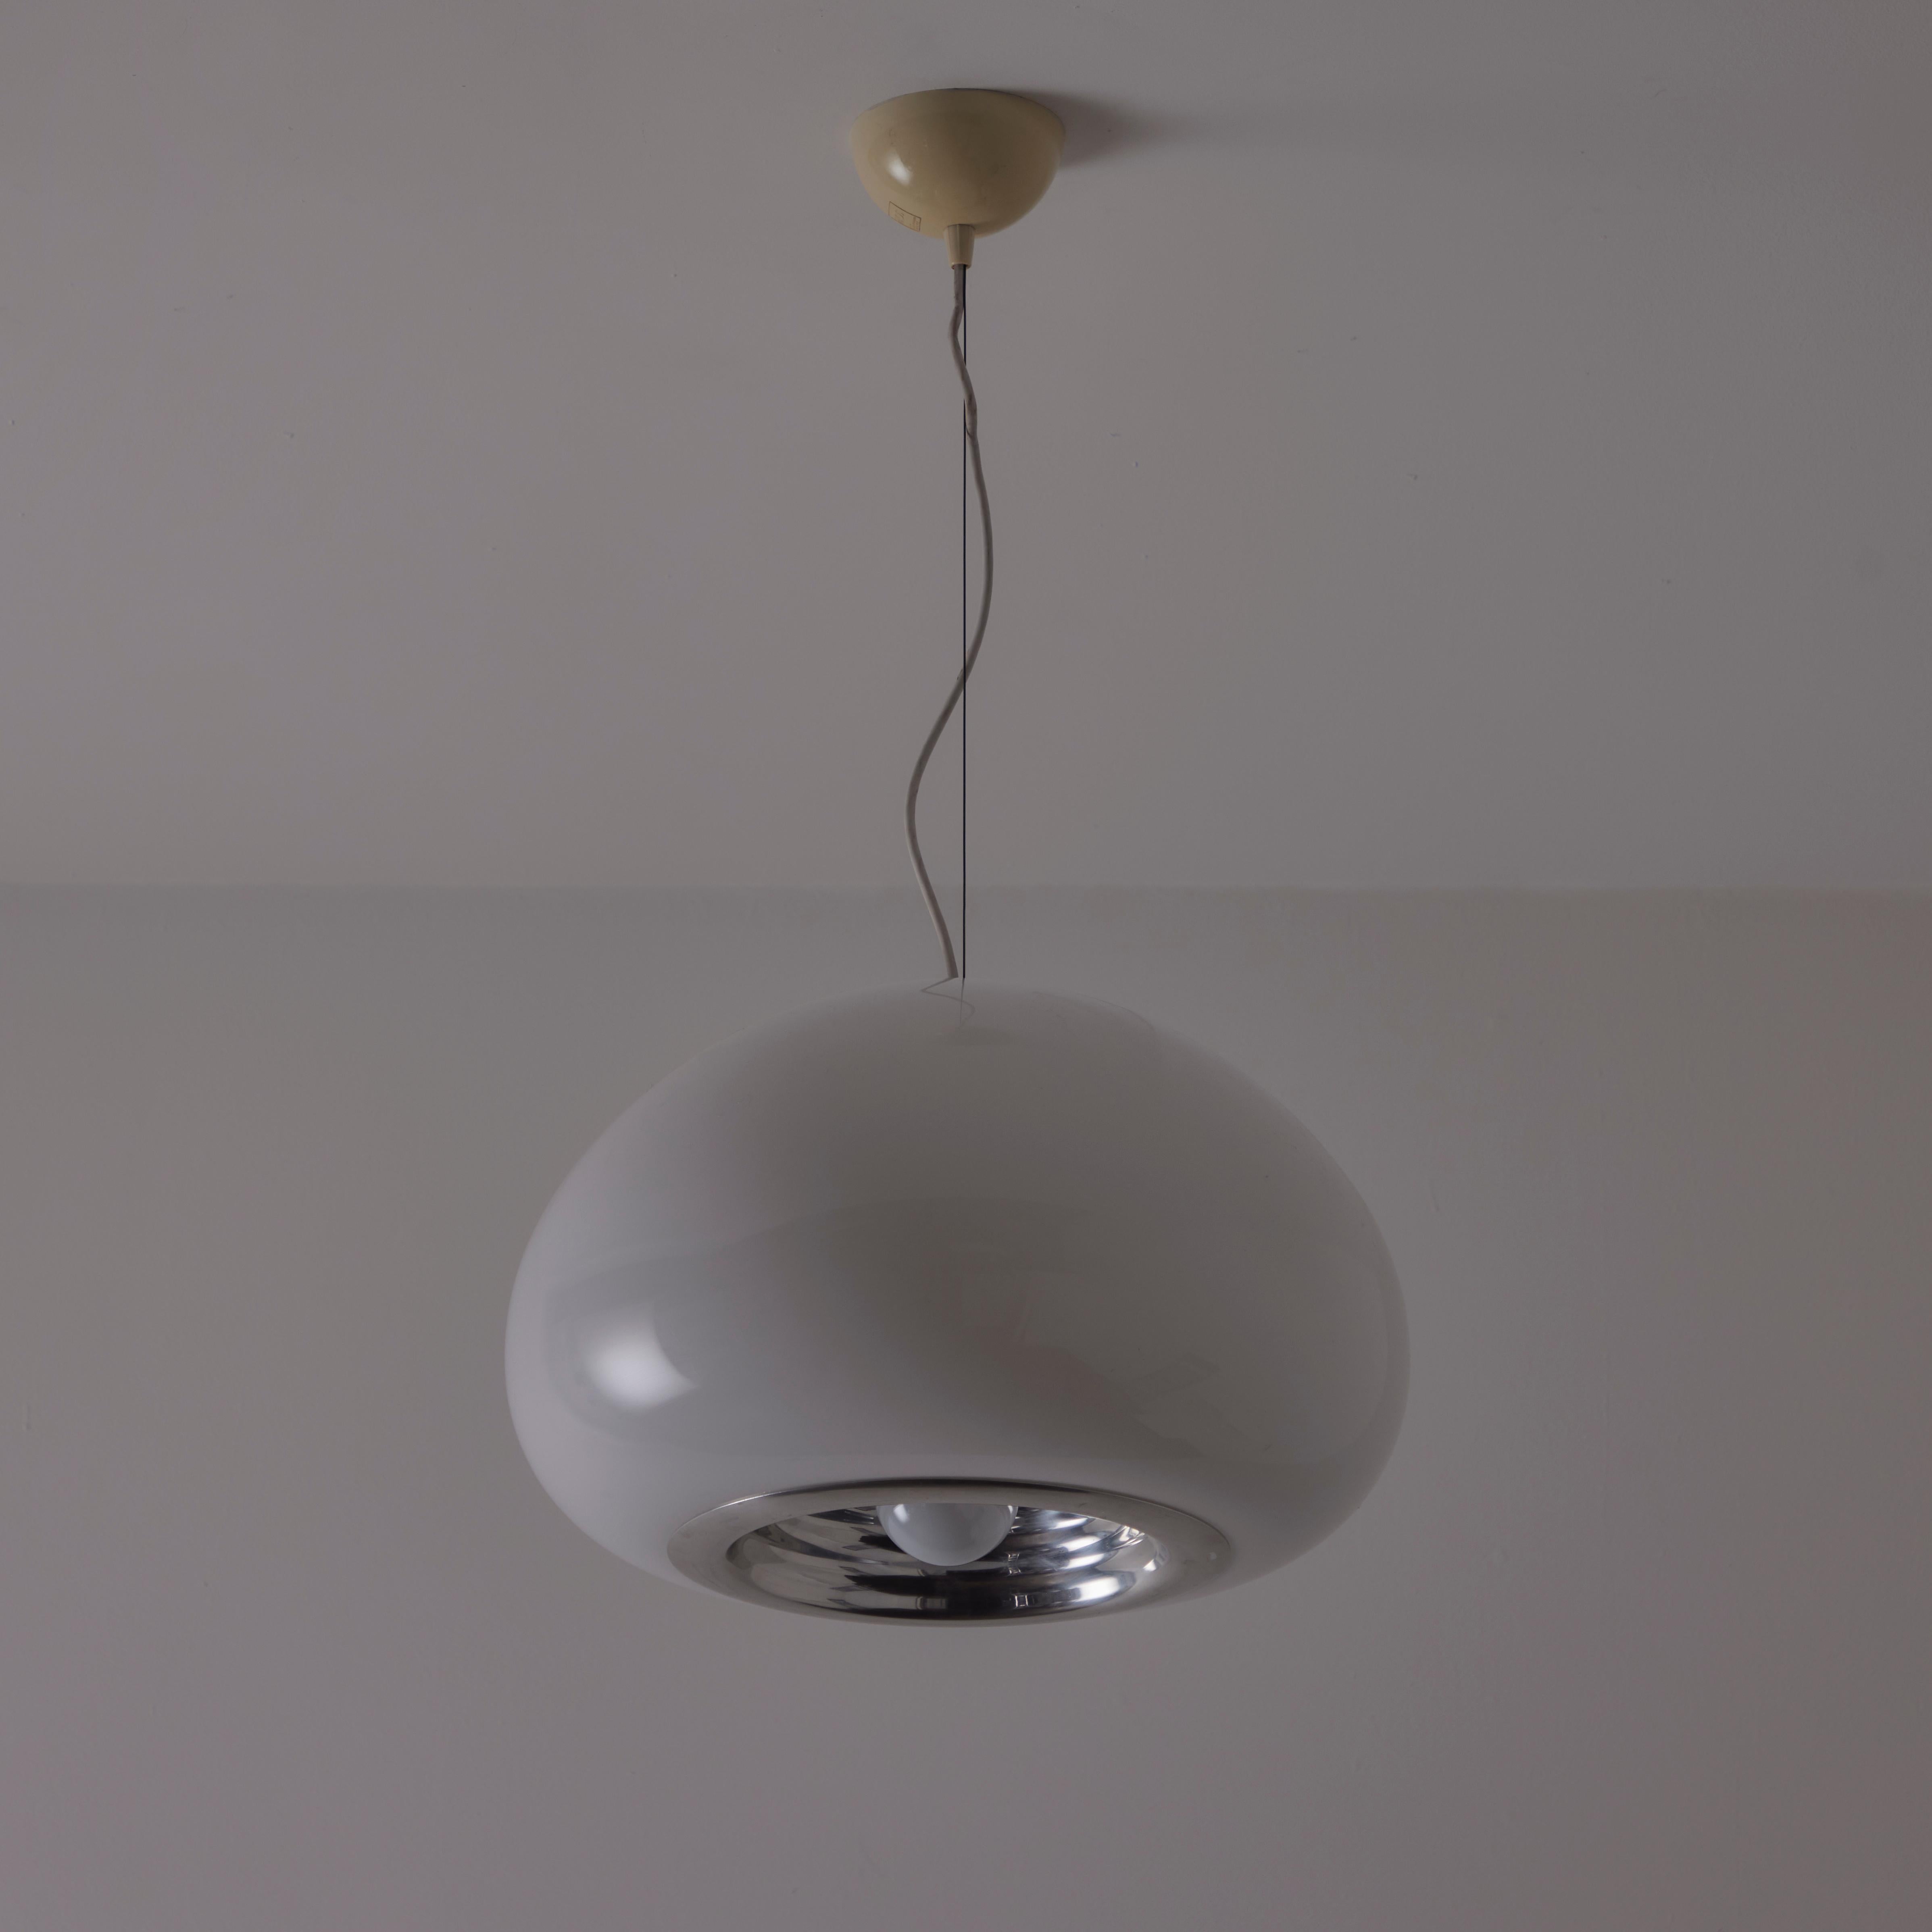 'Black and White' Ceiling Light by Achille & Pier Giacomo Castiglioni for Flos In Good Condition For Sale In Los Angeles, CA